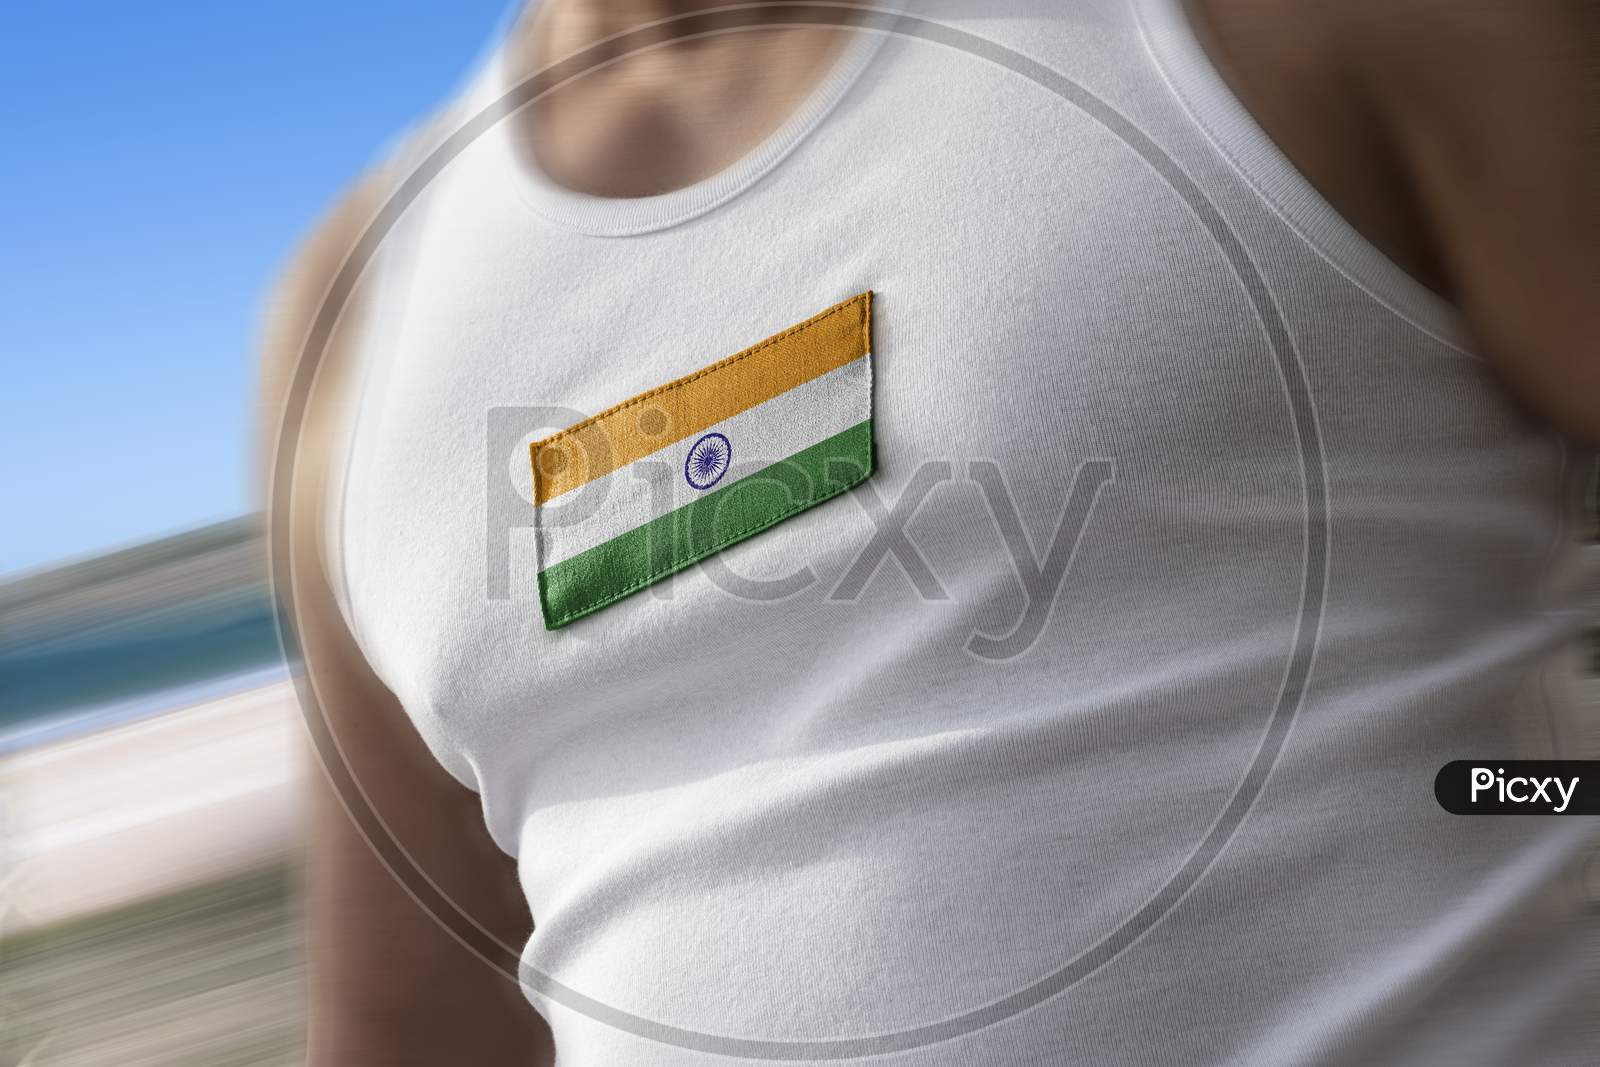 The National Flag Of India On The Athlete'S Chest